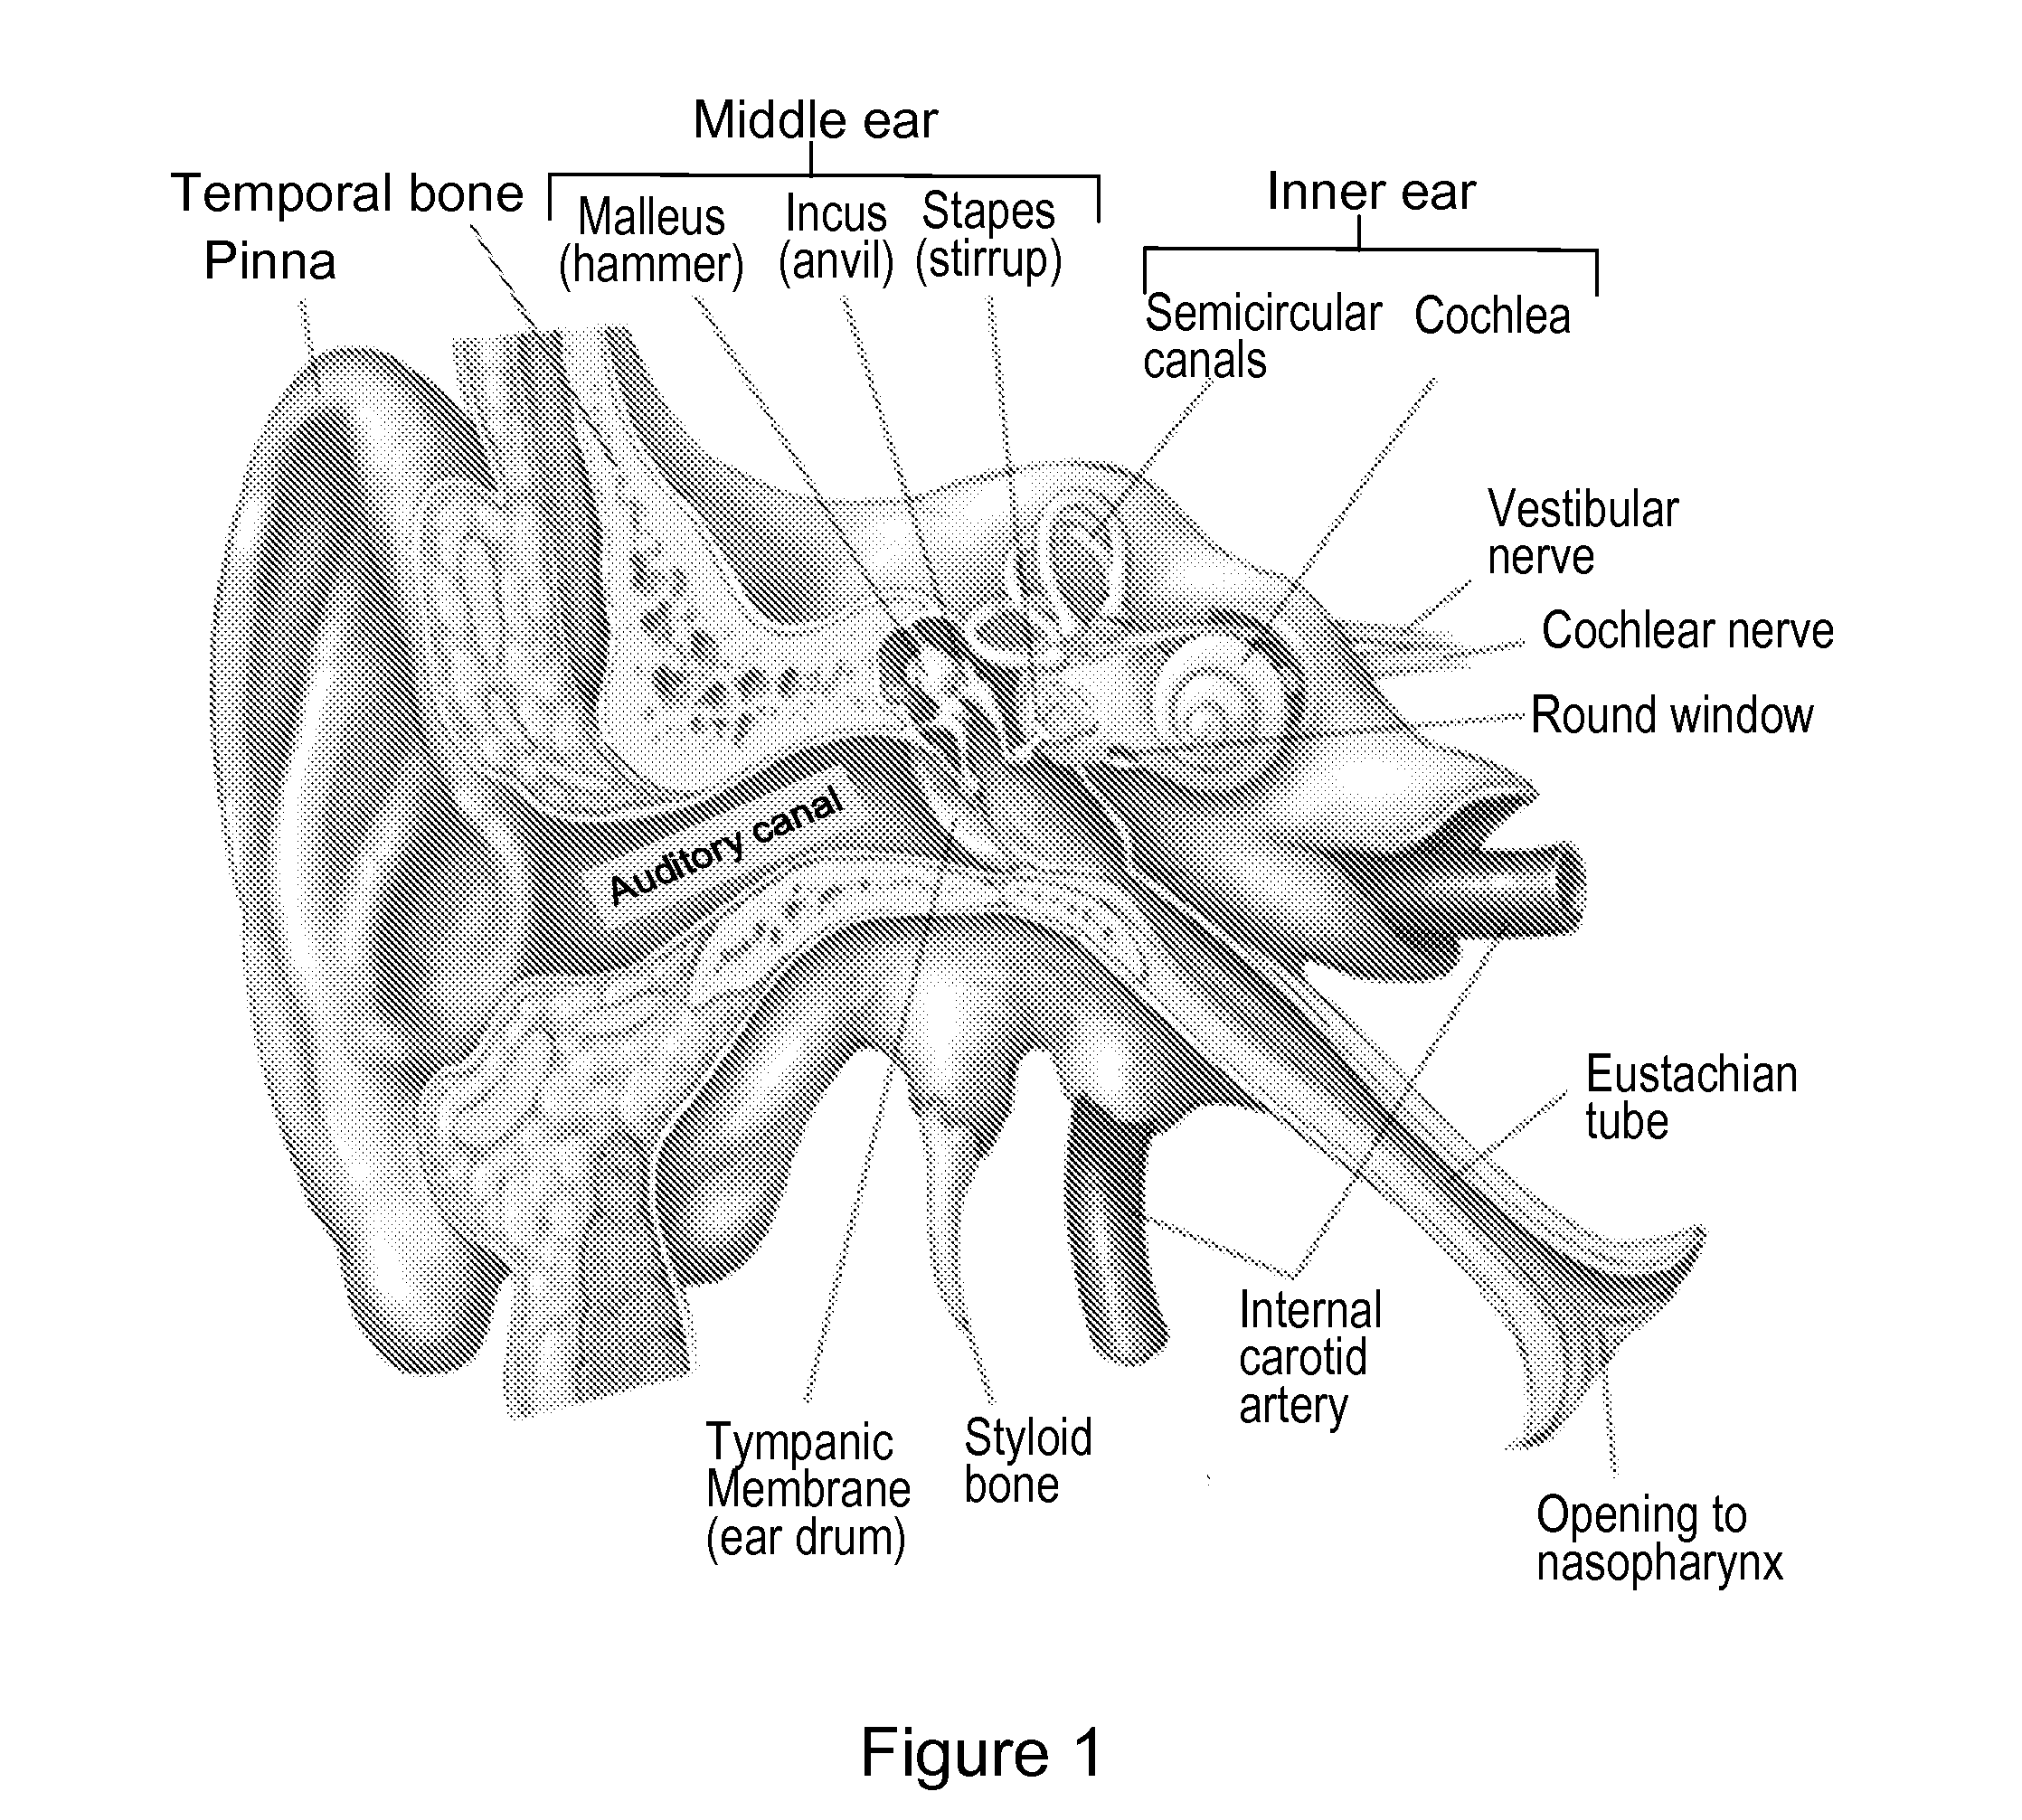 System and method to locally deliver therapeutic agent to inner ear